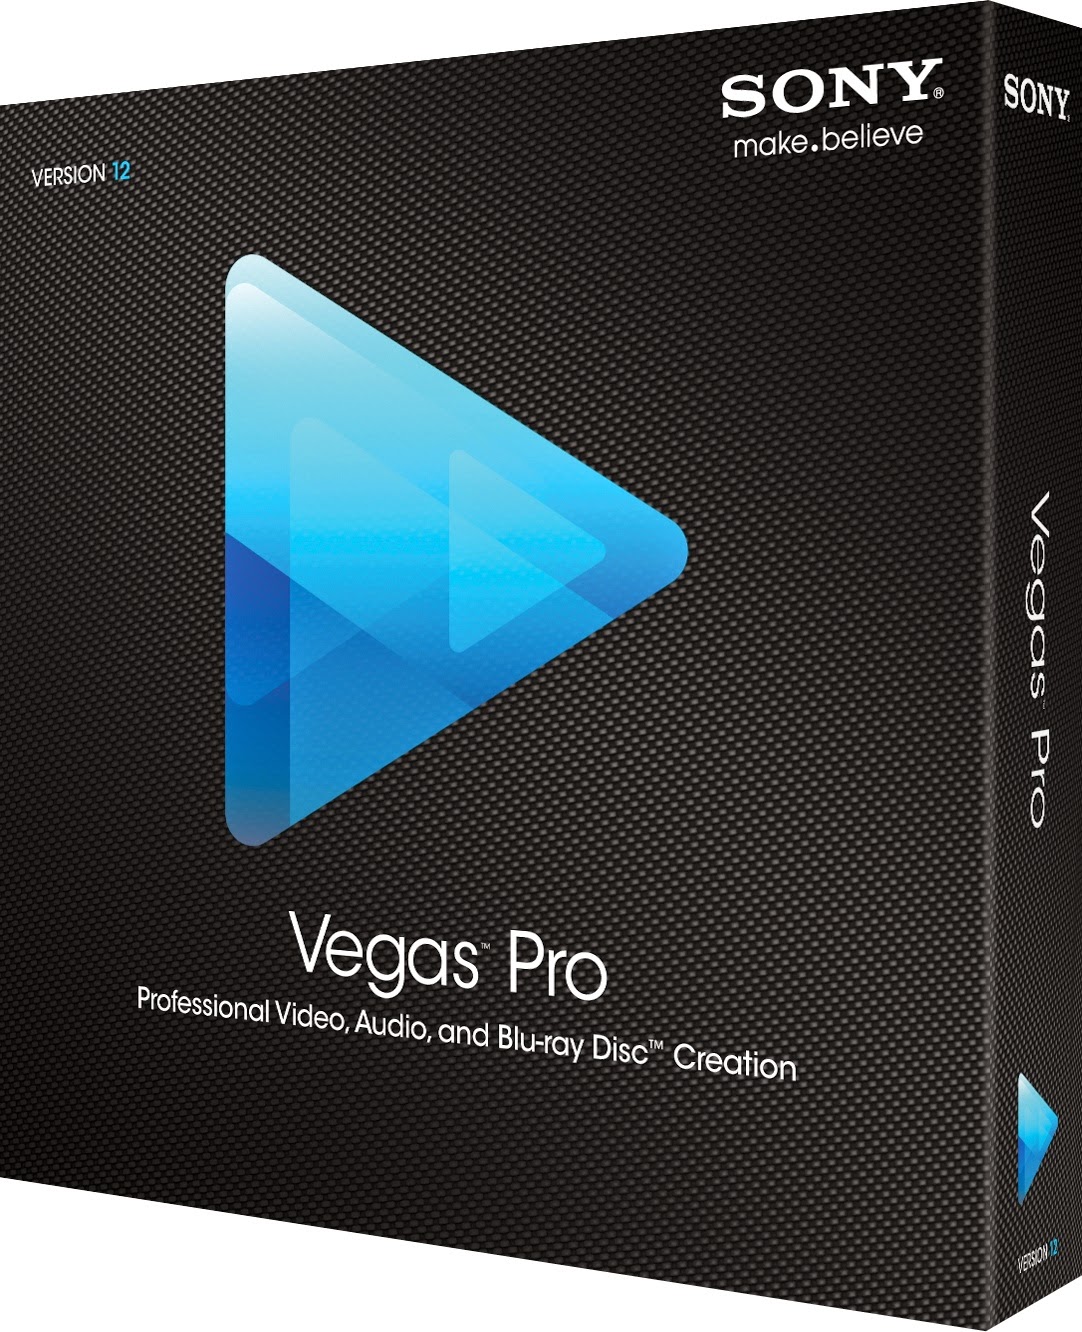 sony vegas pro 12 free download for windows 10